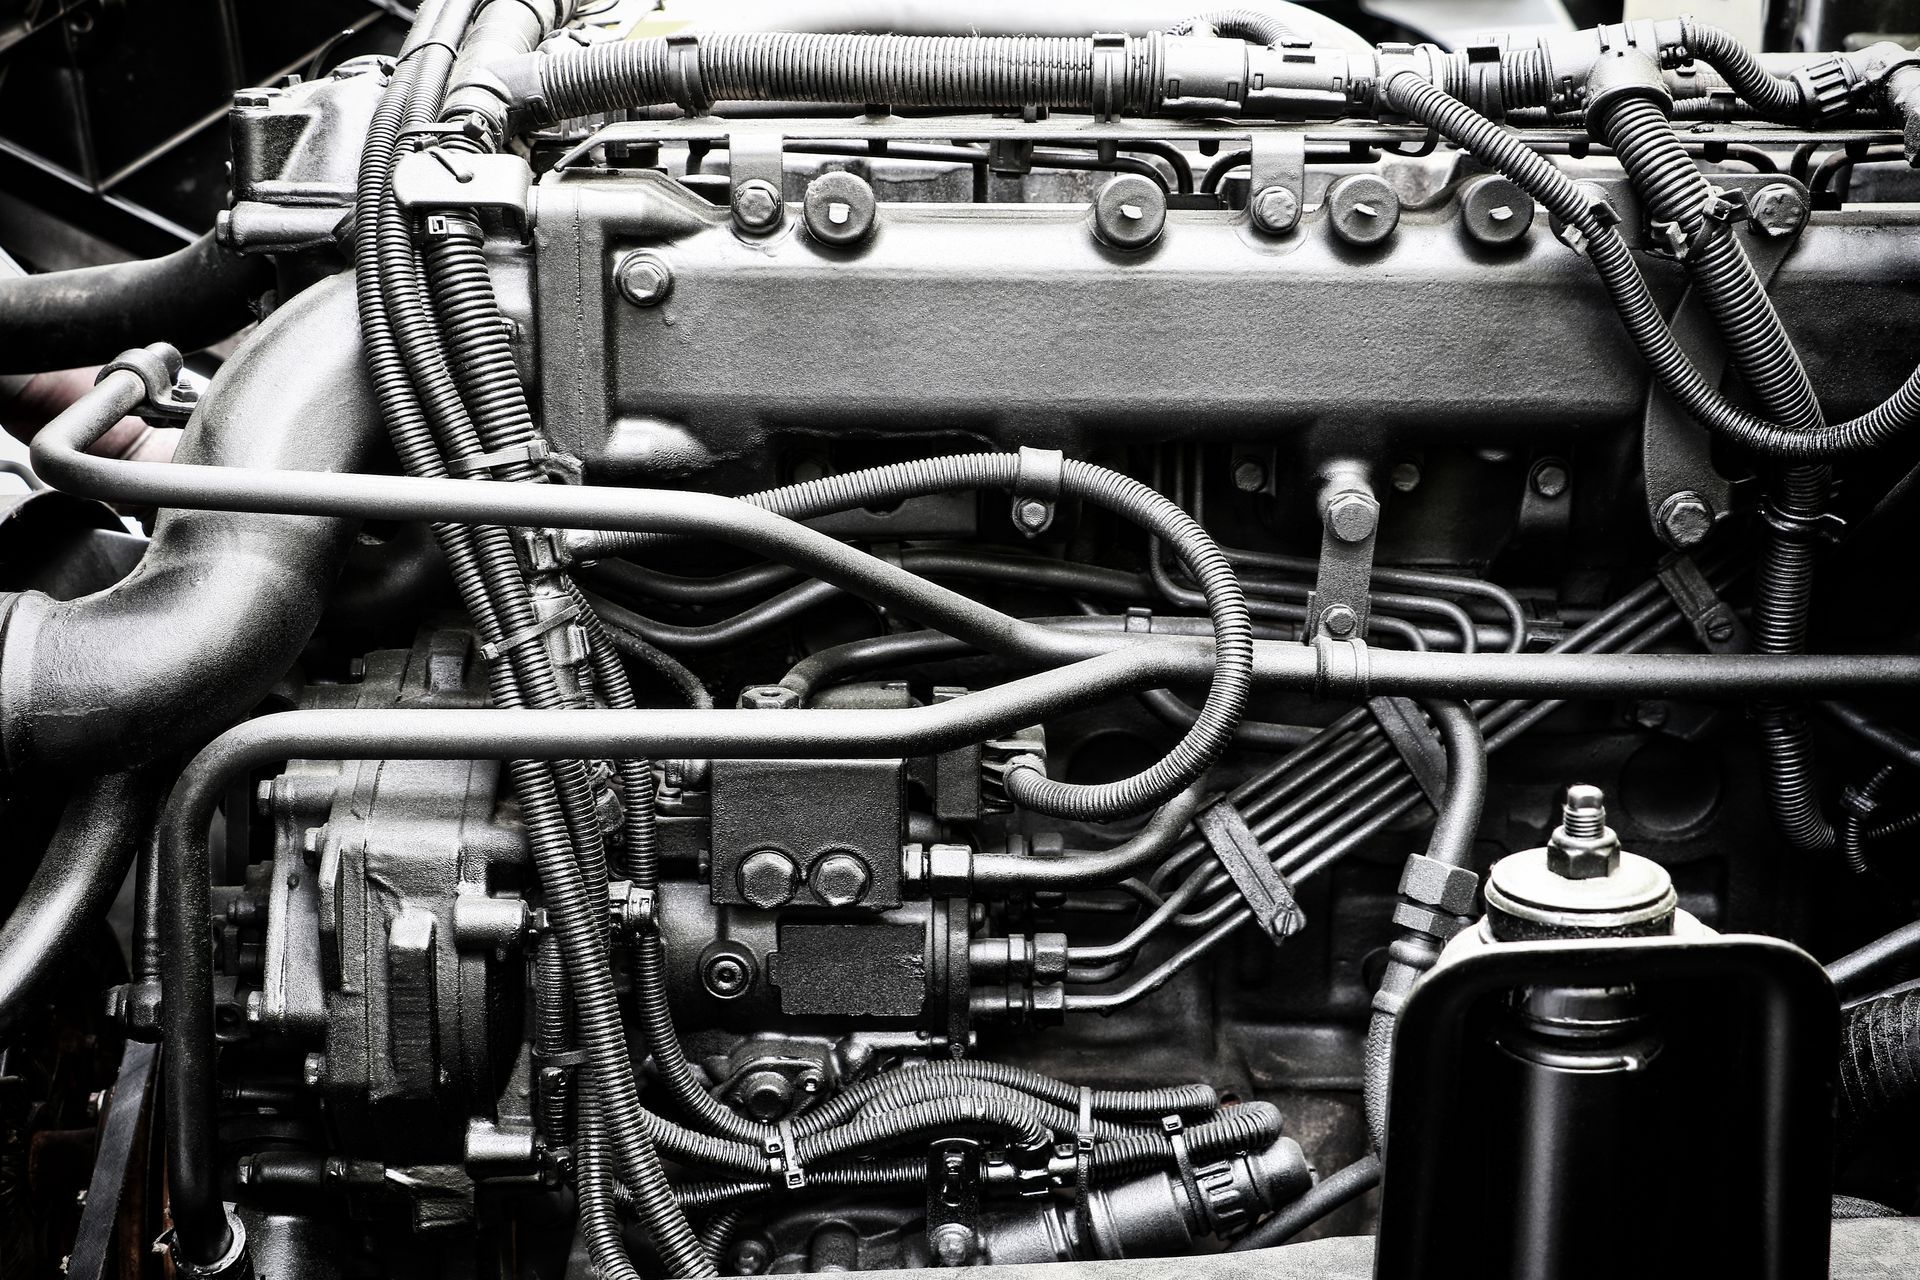 Diesel Engine Maintenance at ﻿Terry's Automotive Group﻿ in ﻿Olympia, WA﻿